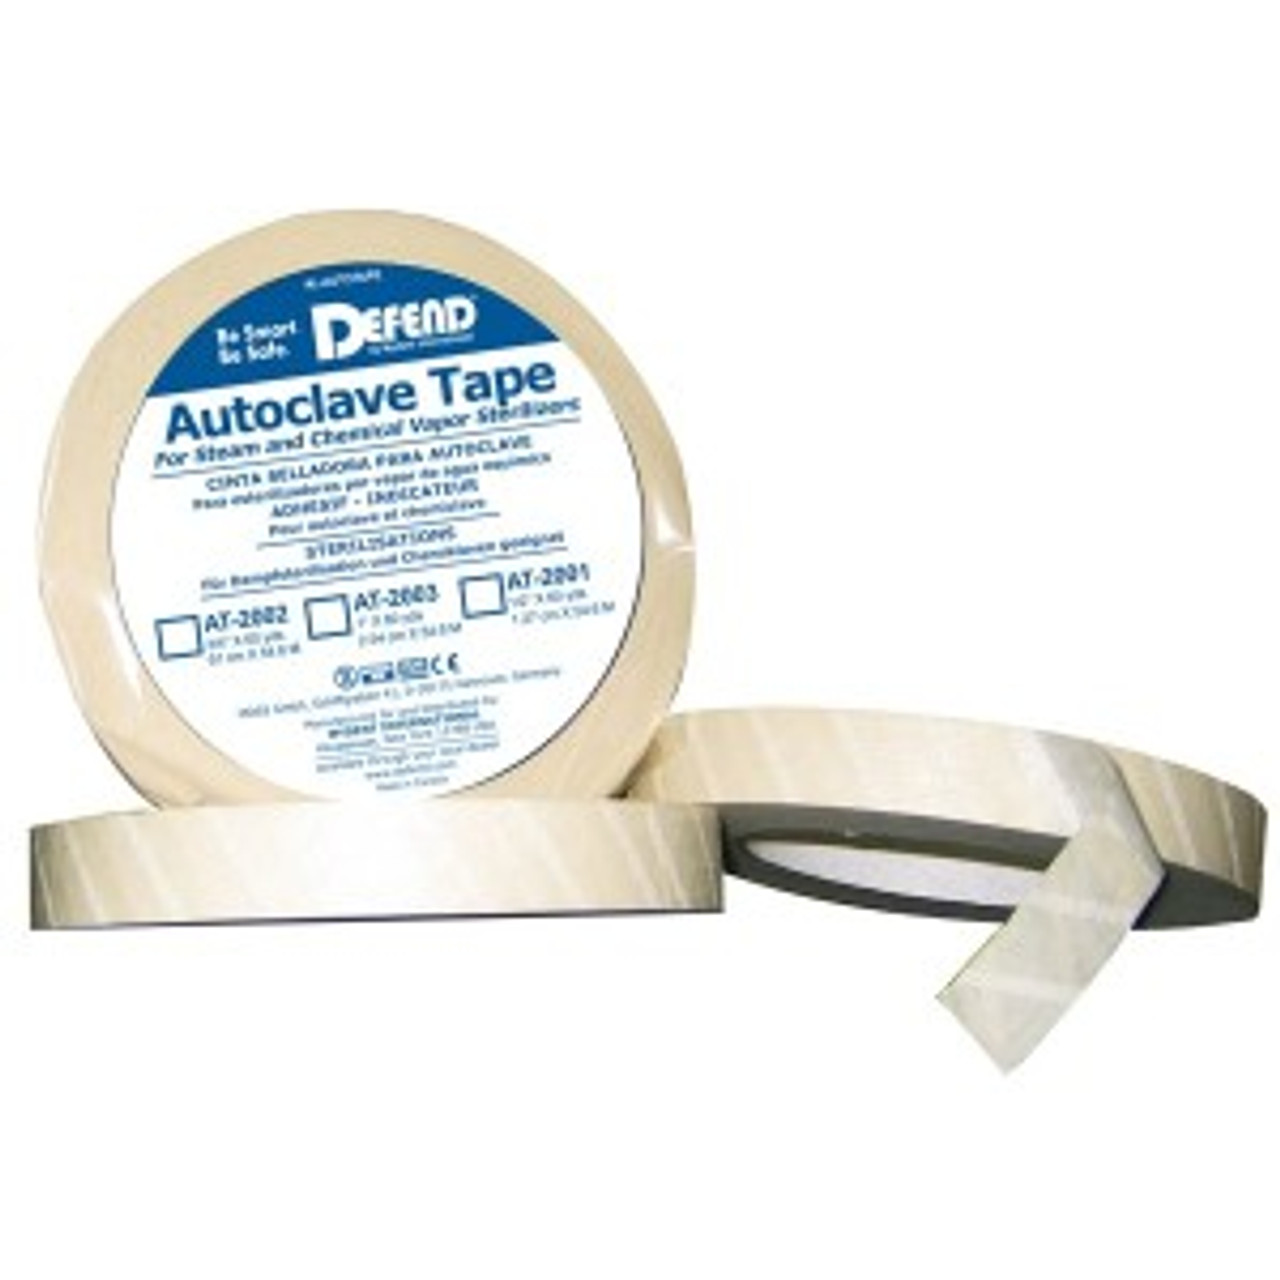 Defend Autoclave Indicator Tape 1" 60 Yd Roll, AT-2003, Infection Control, Sterilization Wraps (CSR), Defend Autoclave Indicator Tape